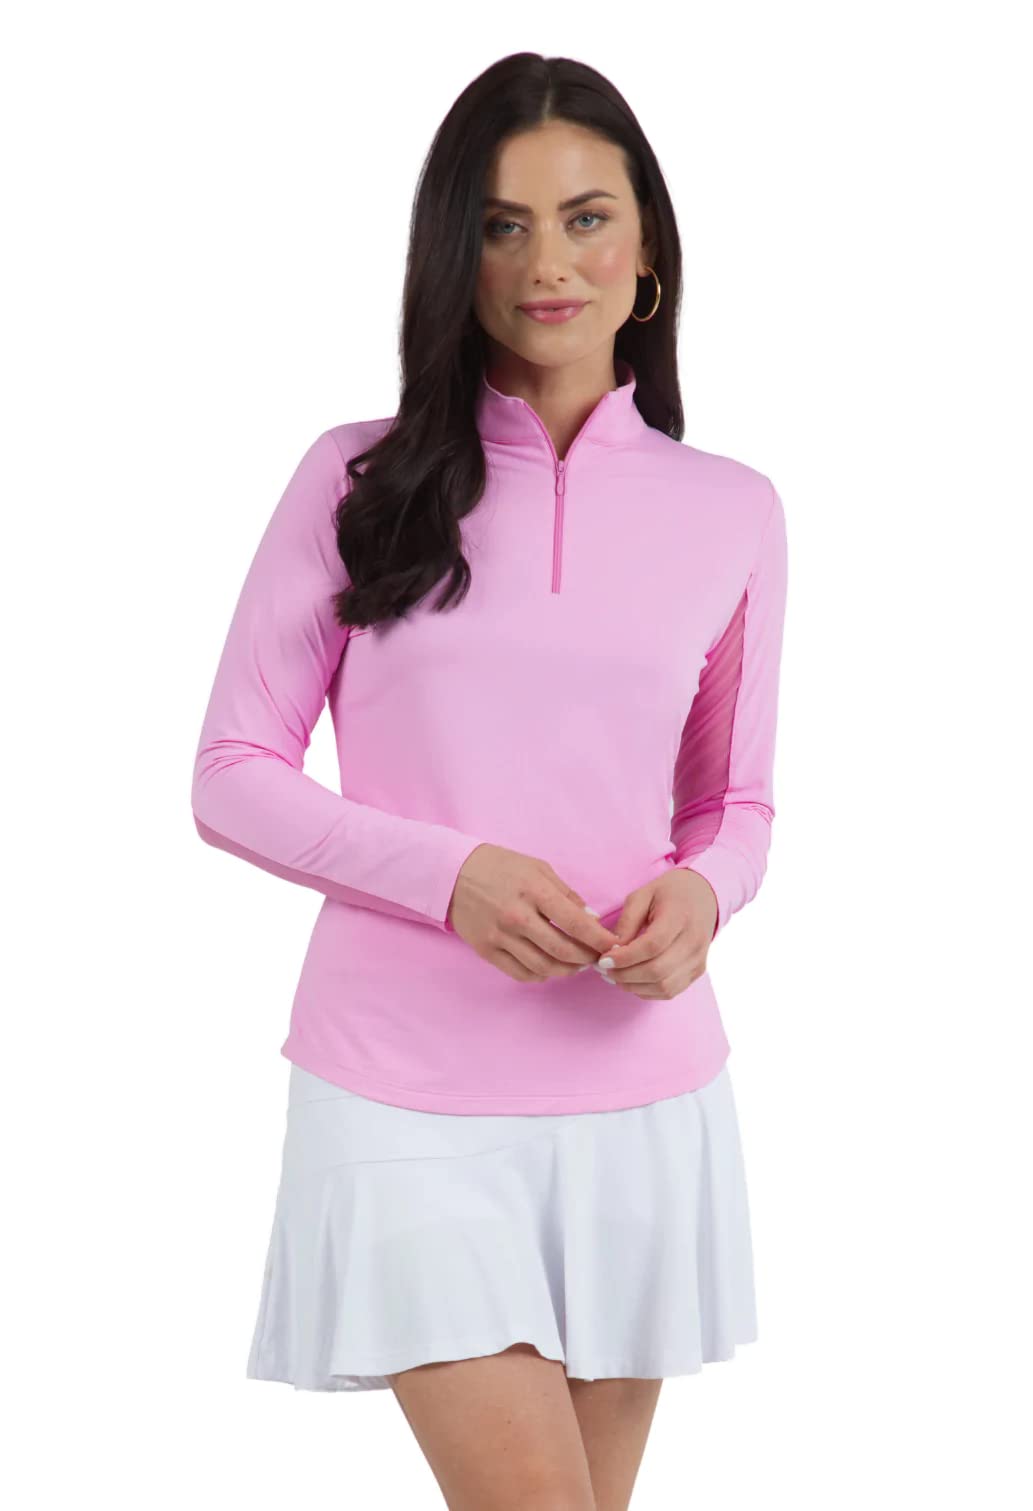 IBKUL Athleisure Wear Sun Protective UPF 50+ Icefil Cooling Tech Long Sleeve Mock Neck Top with Under Arm Mesh 80000 Jade Solid M